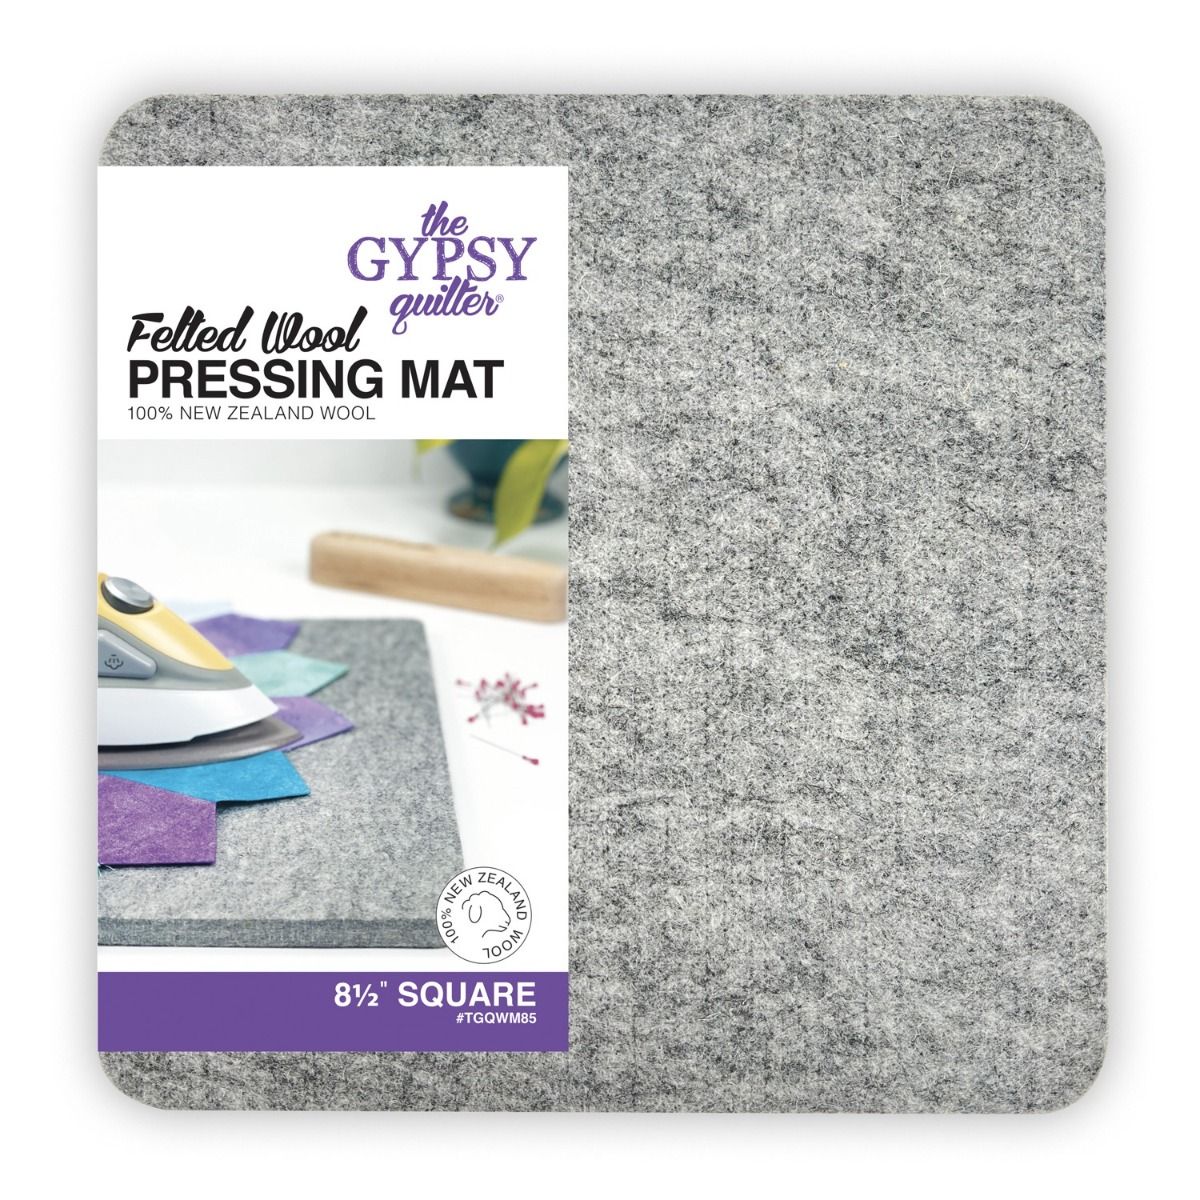 Mini Felted Wool Pressing Mat - By Gypsy Quilter 8.5 X 8.5 |  jeromethomasdesigns